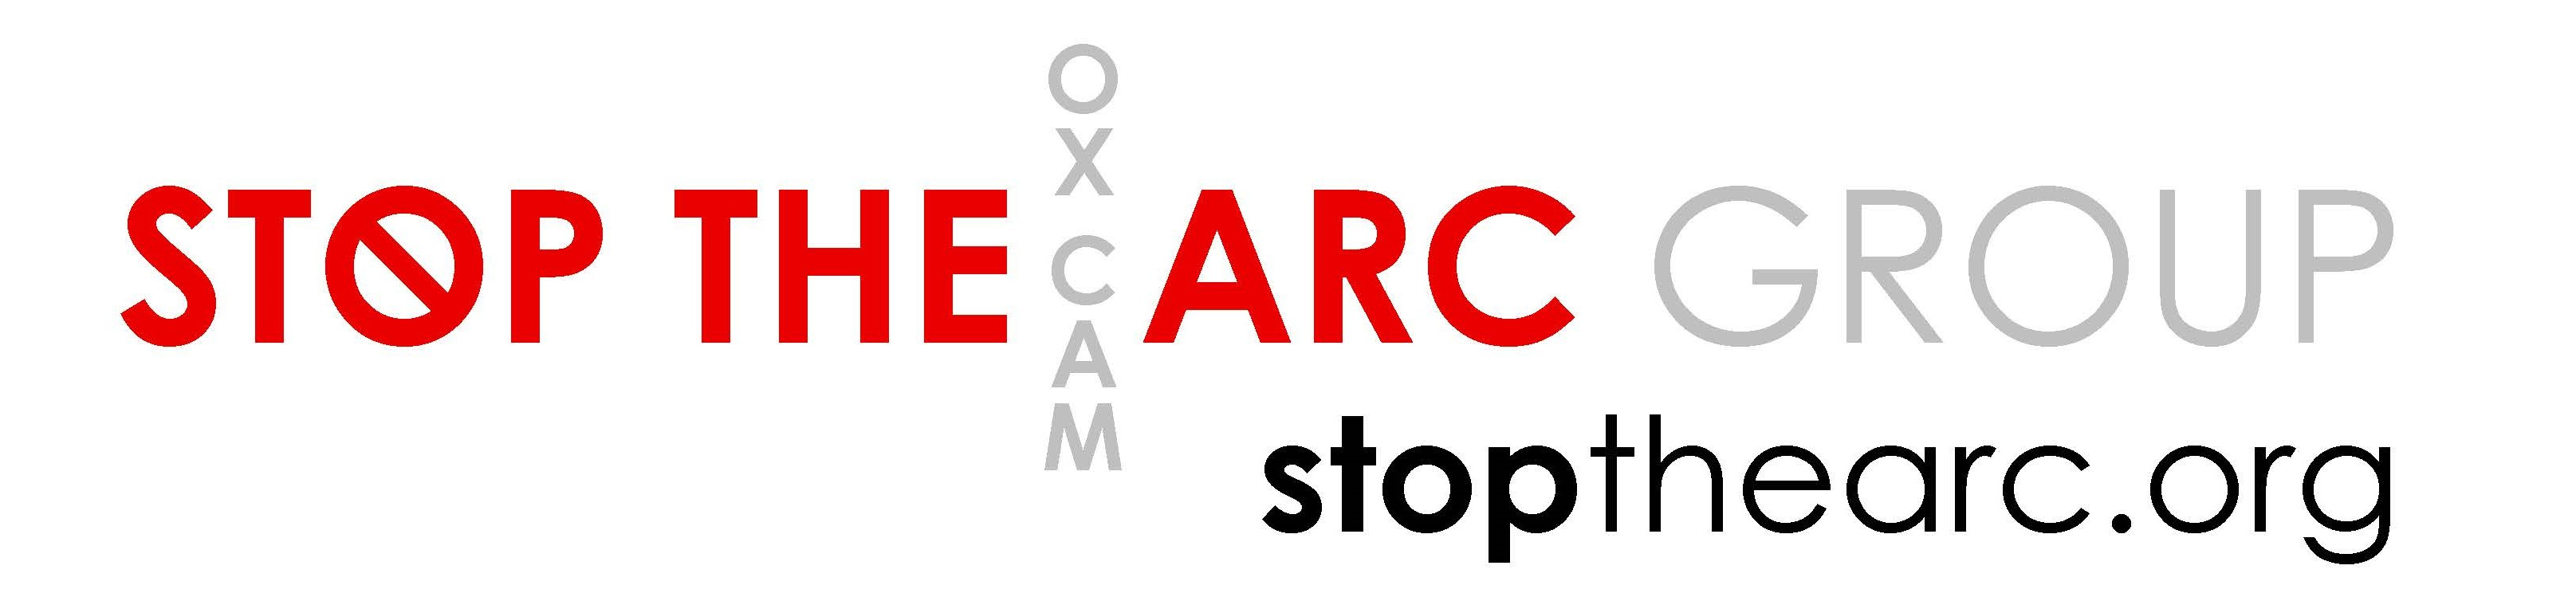 Stop the Arc Group logo